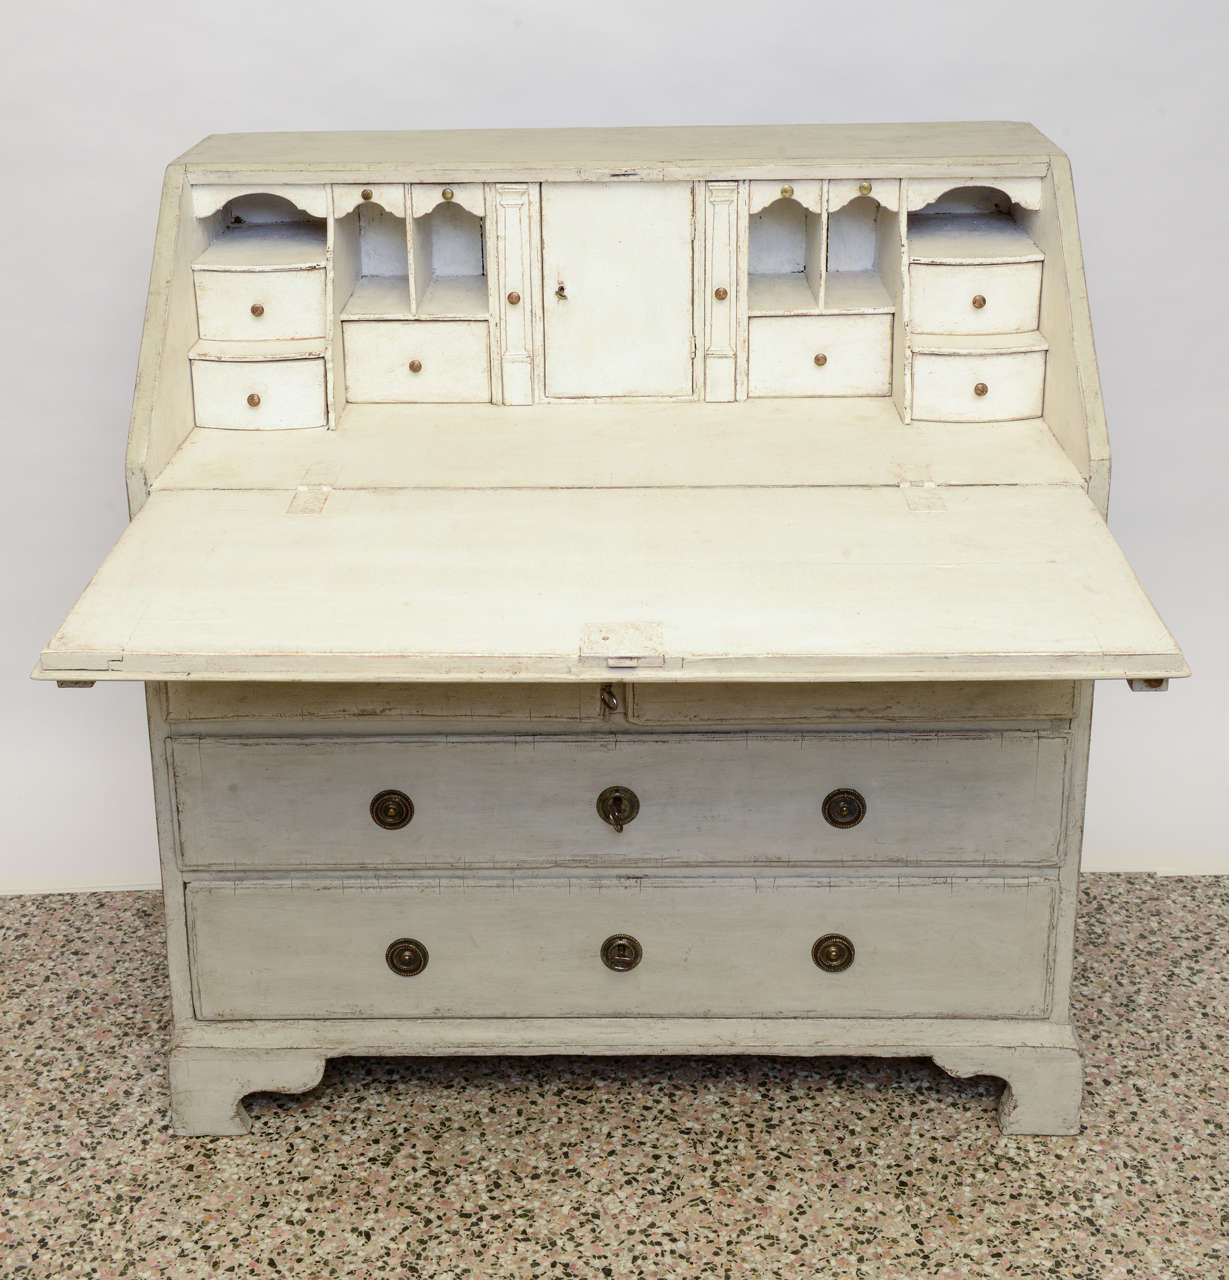 Antique Swedish Period Slant Front White Writing Desk, circa 1760's with slant front and bracket base.  Multiple drawers and pull out compartments behind the writing surface with one over two drawers below.